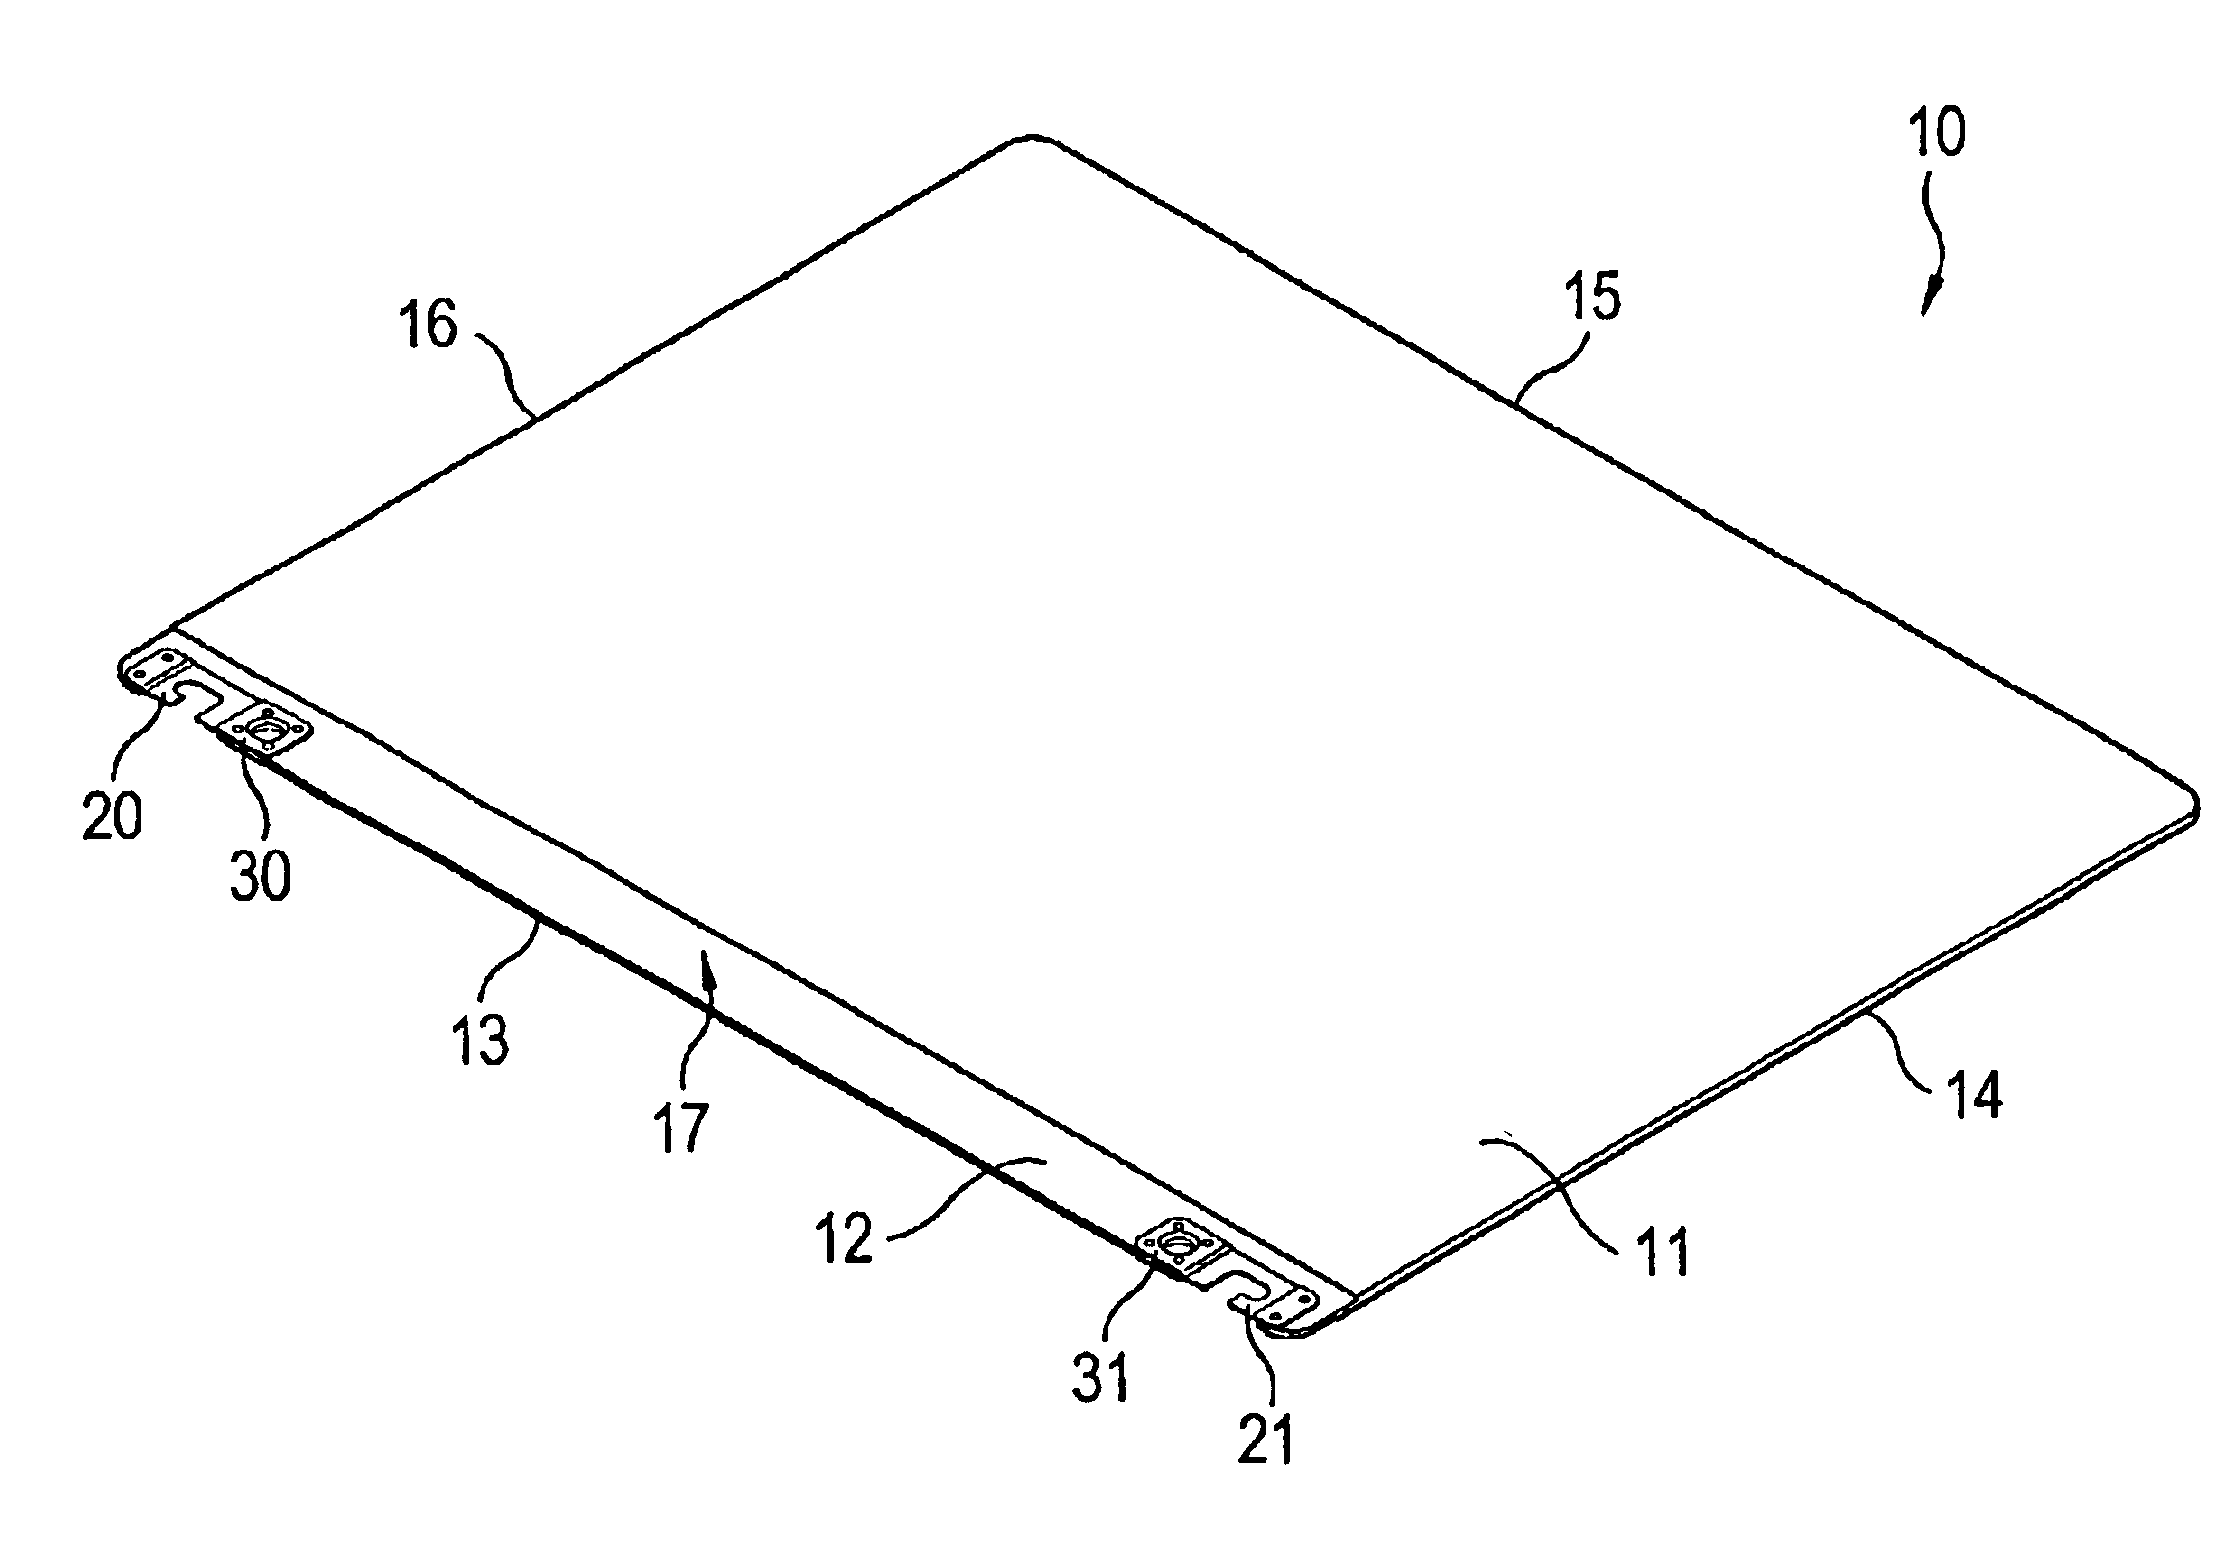 Storage phosphor panel for storing image information and x-ray cassette